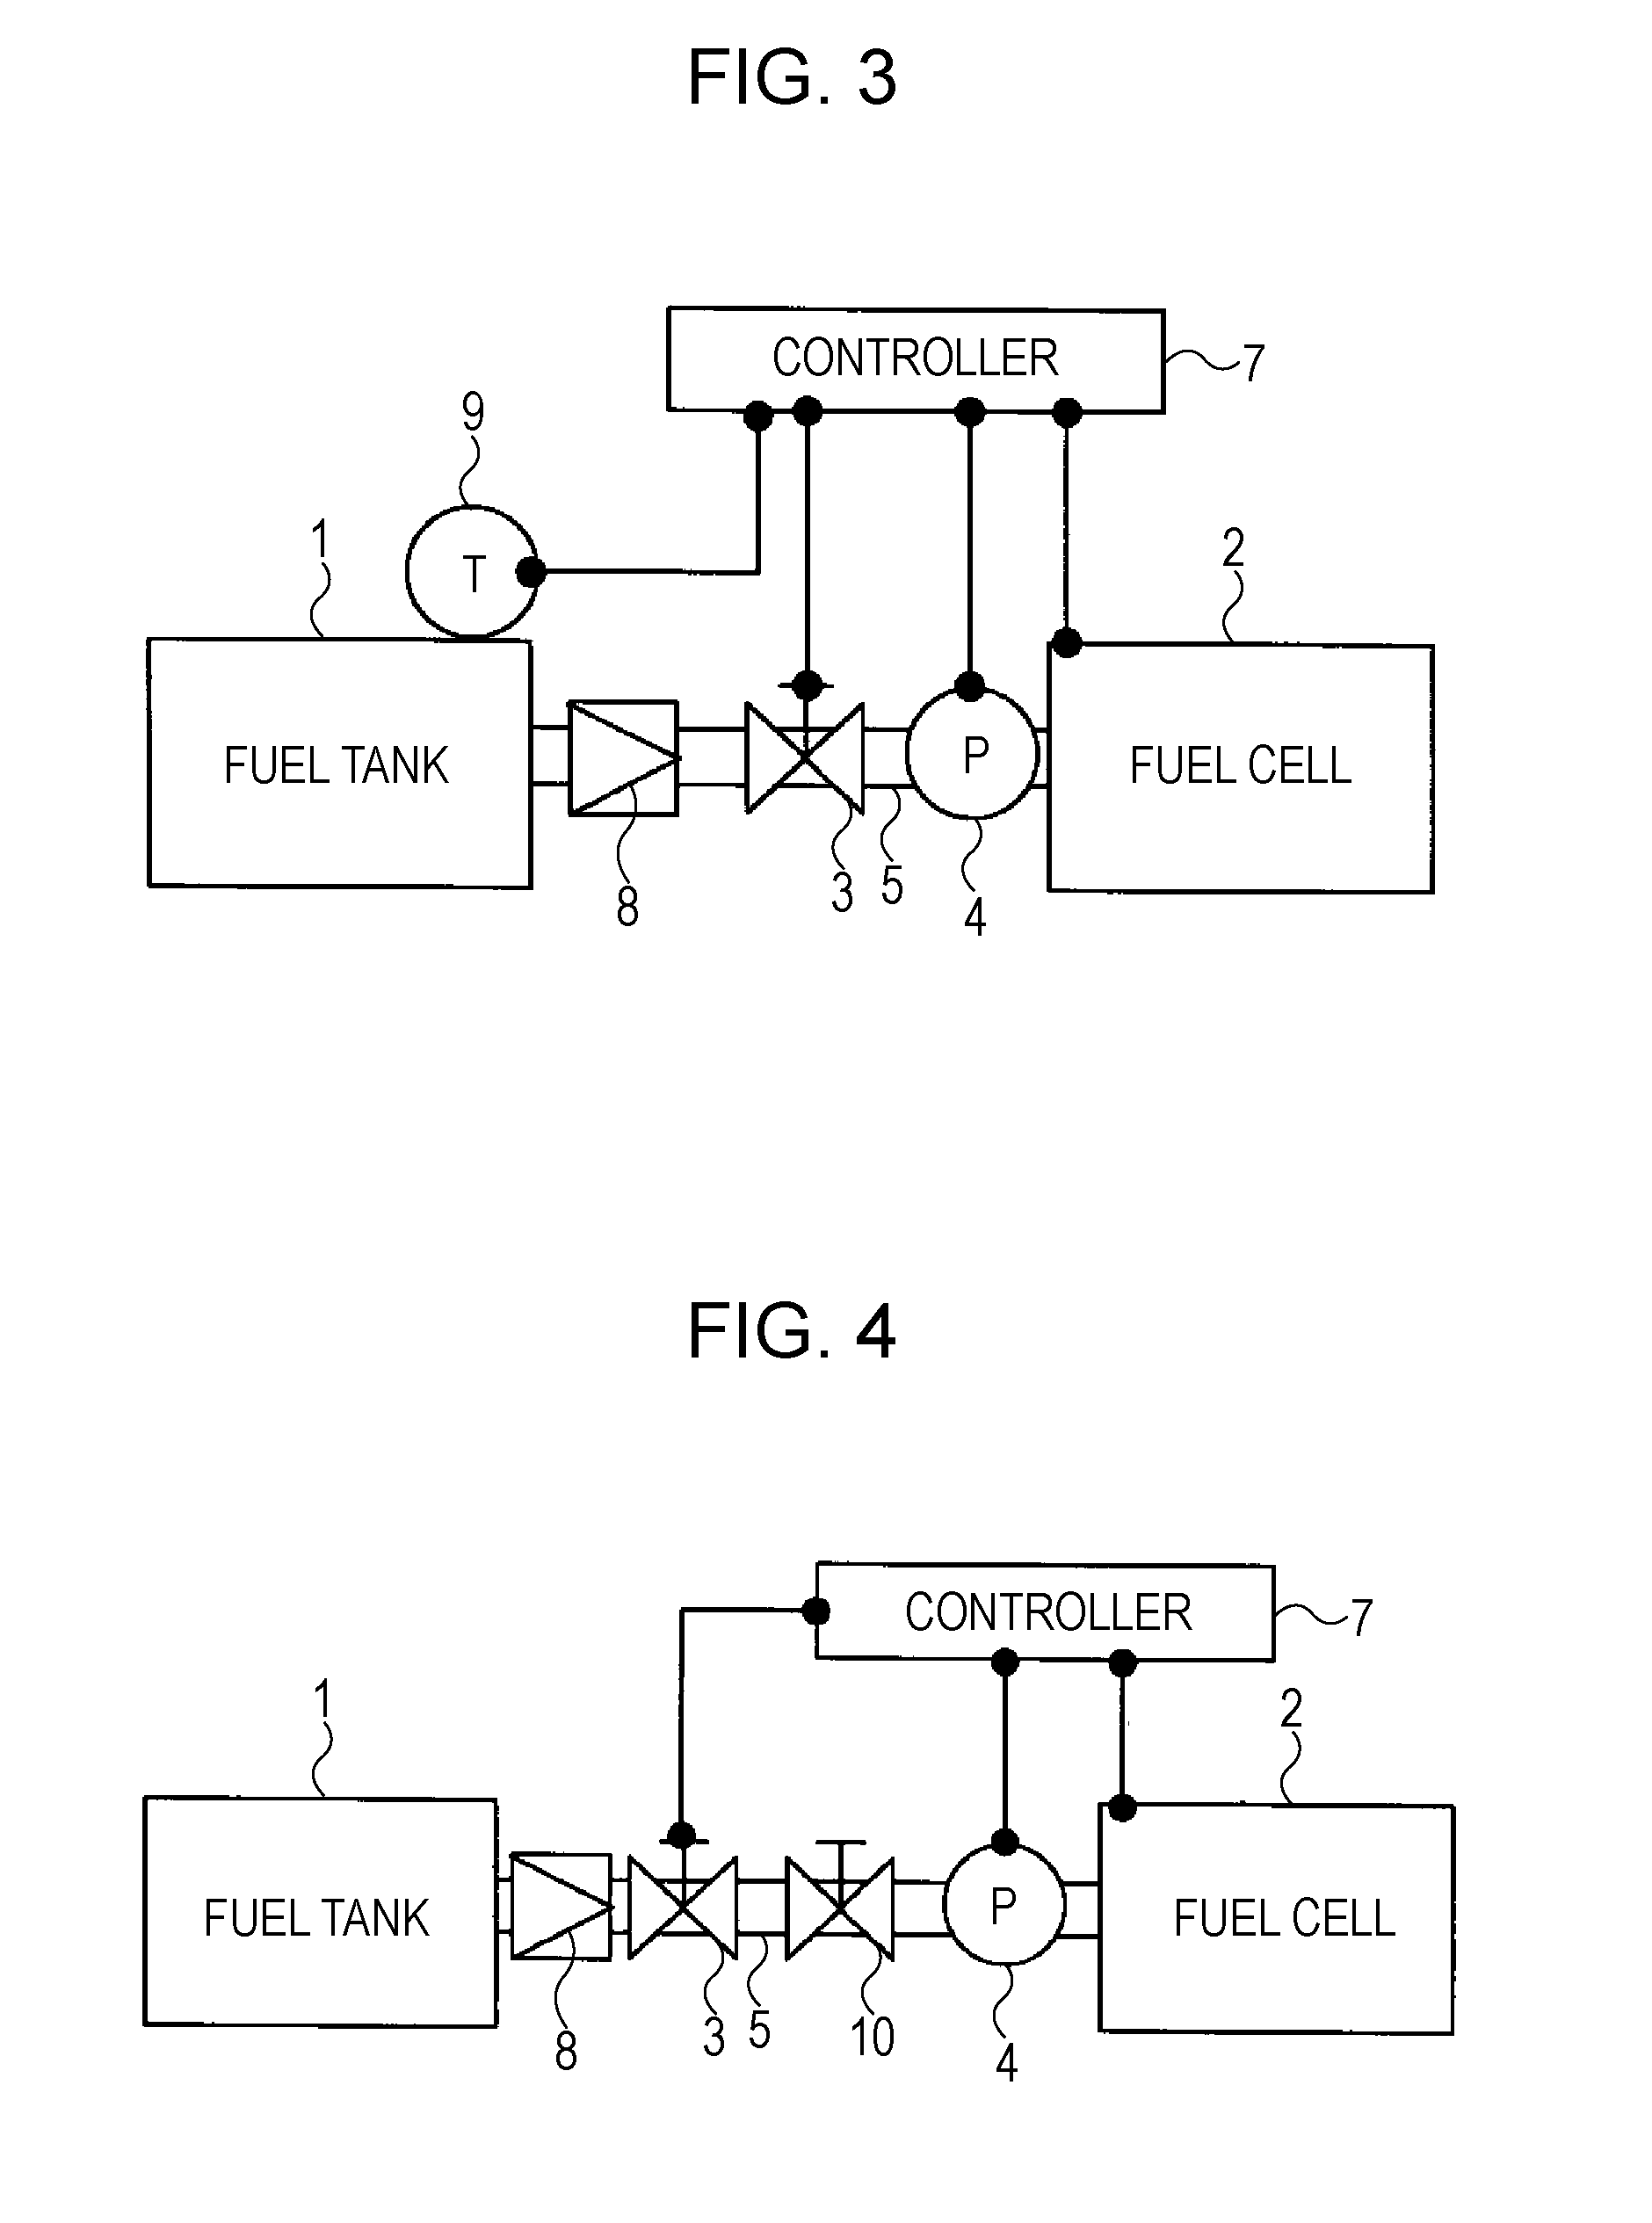 Method for judging system condition in fuel cell system